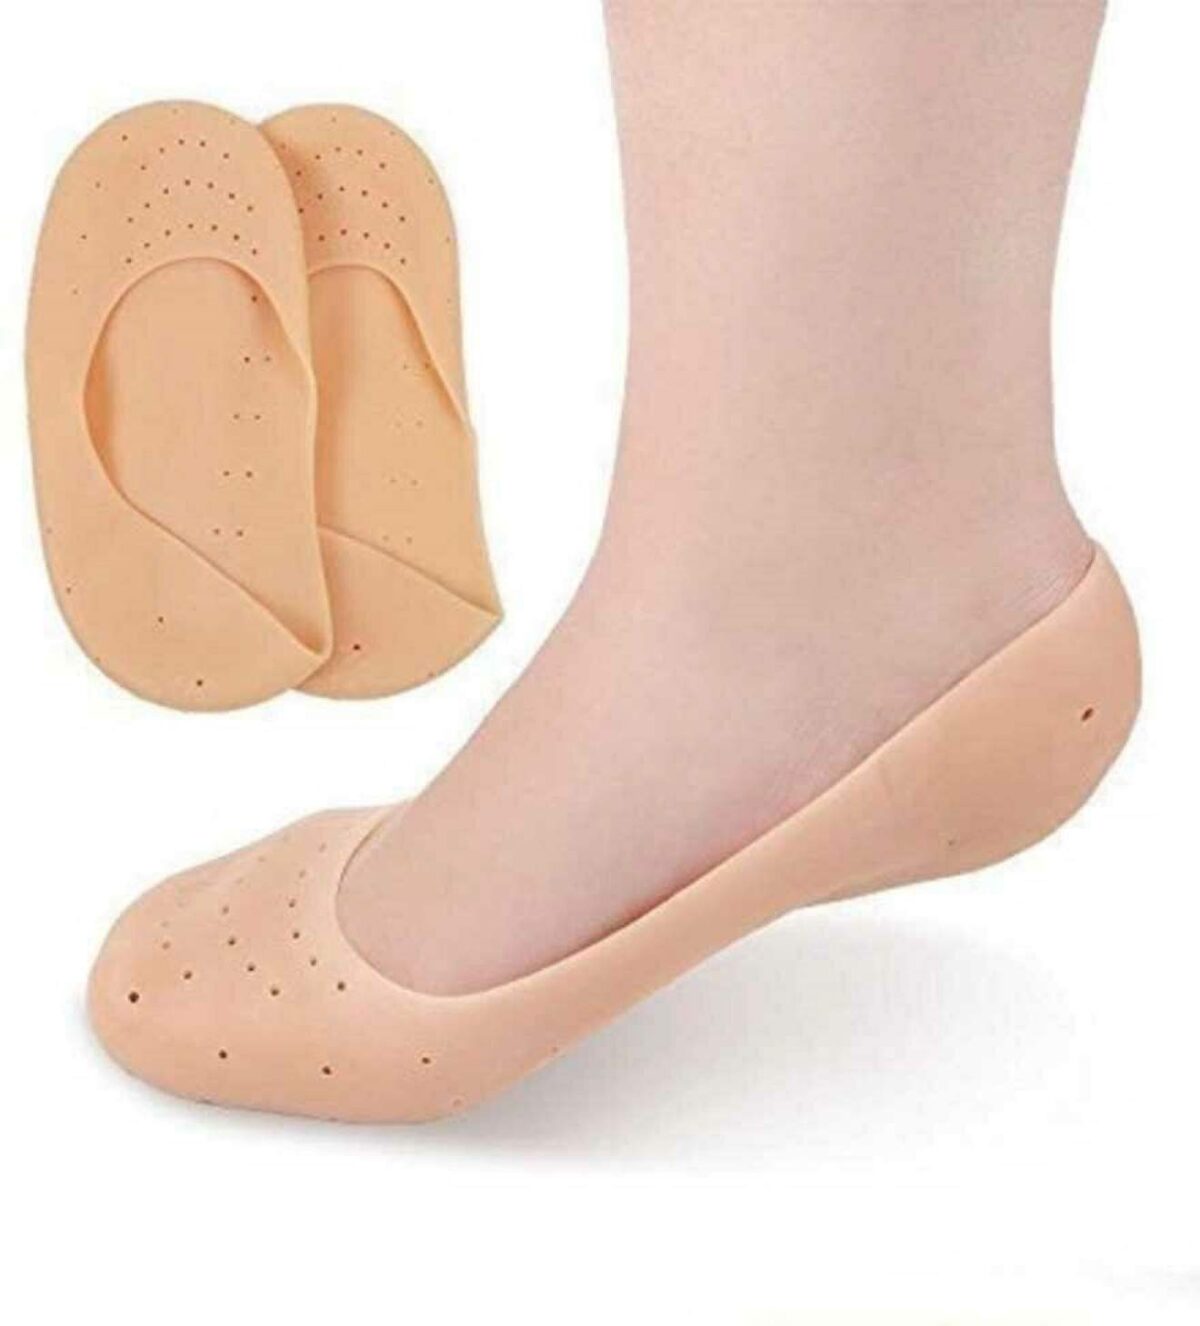 Silicone Heel Protector pain relief Anti Crack Gel Pad Socks Foot Support Pack of 1 j 1